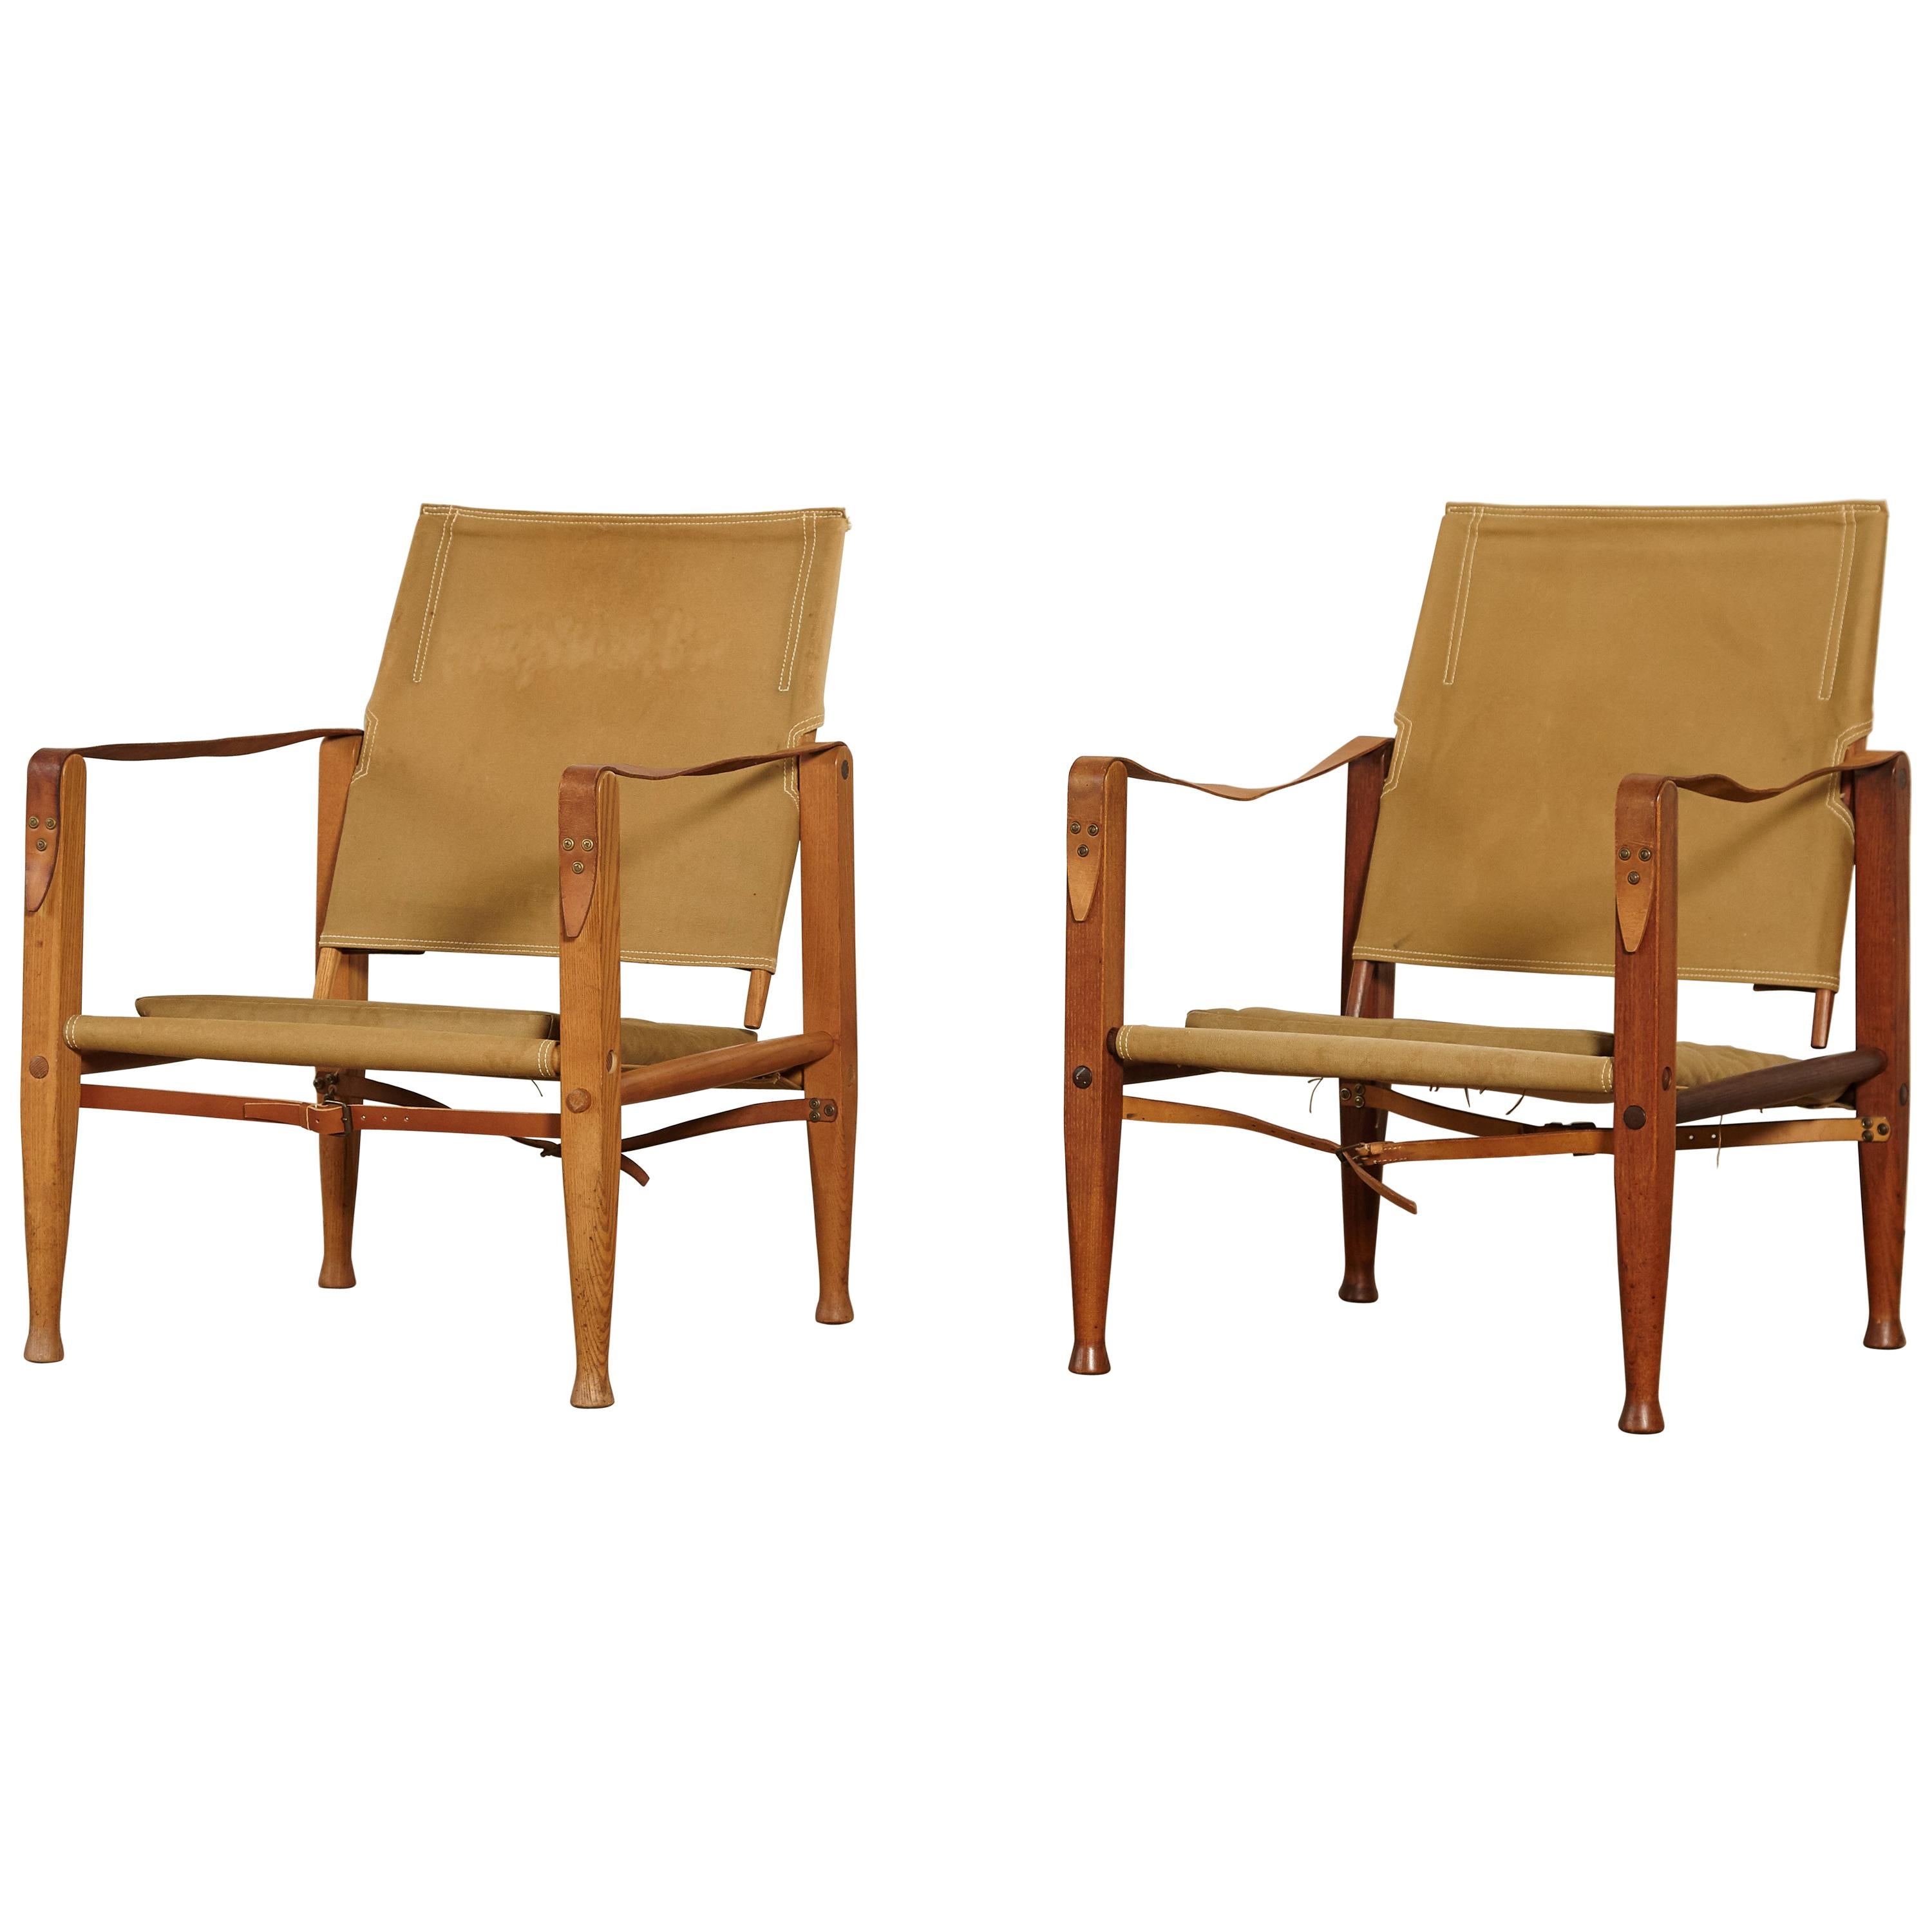 Two Kaare Klint Safari Chairs in Canvas, Made by Rud Rasmussen, Denmark, 1960s